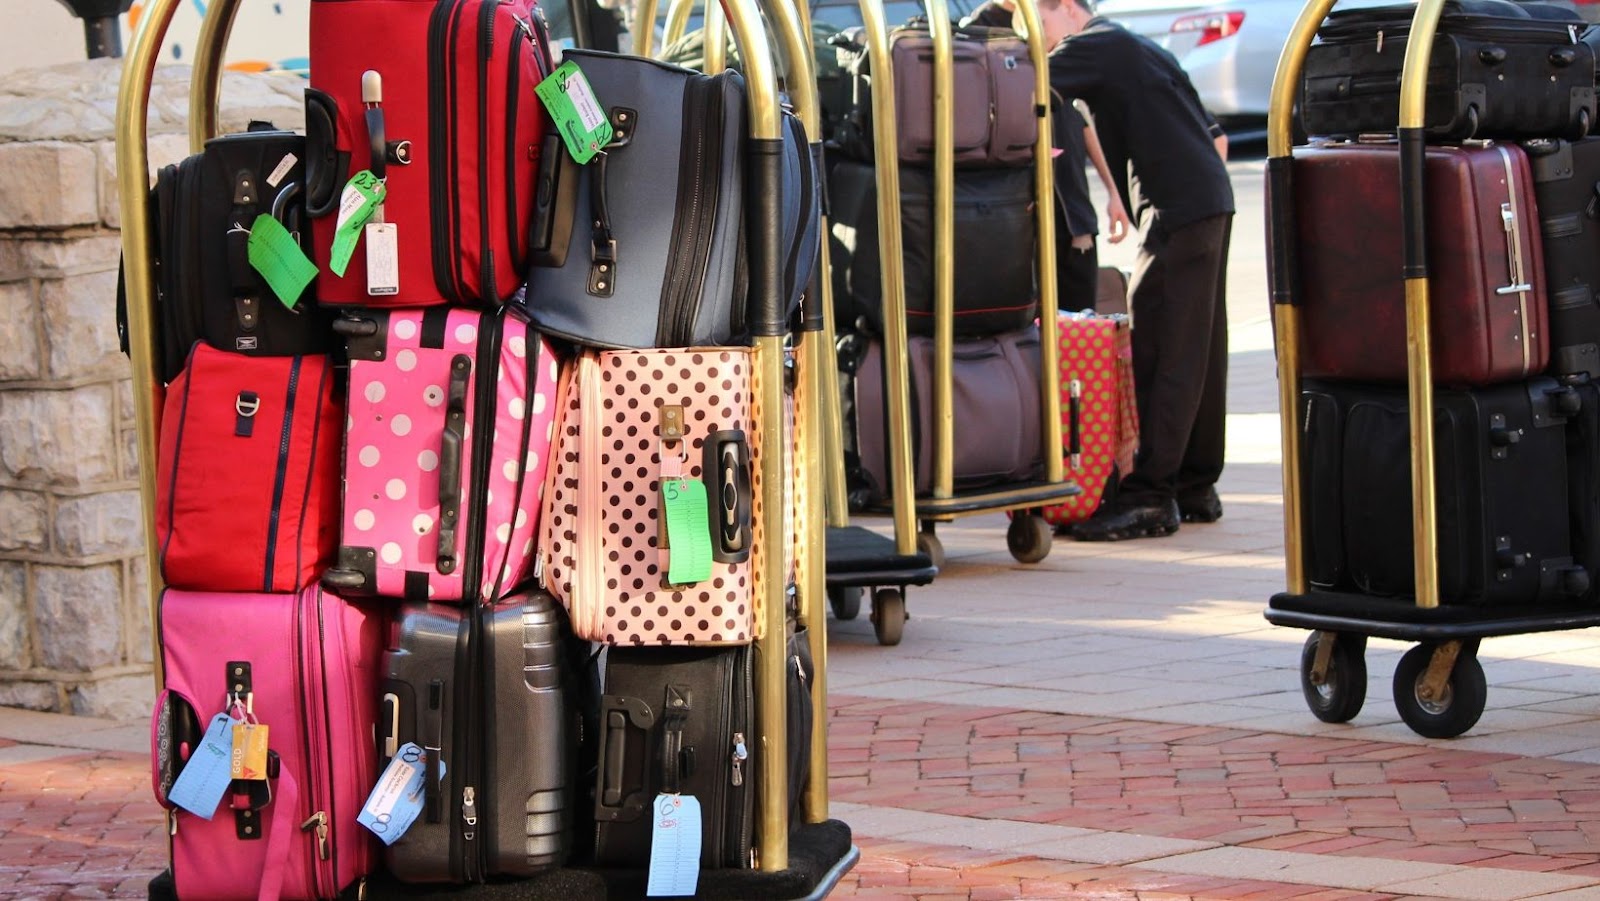 Do Airport Limousines Have Room for Luggage?